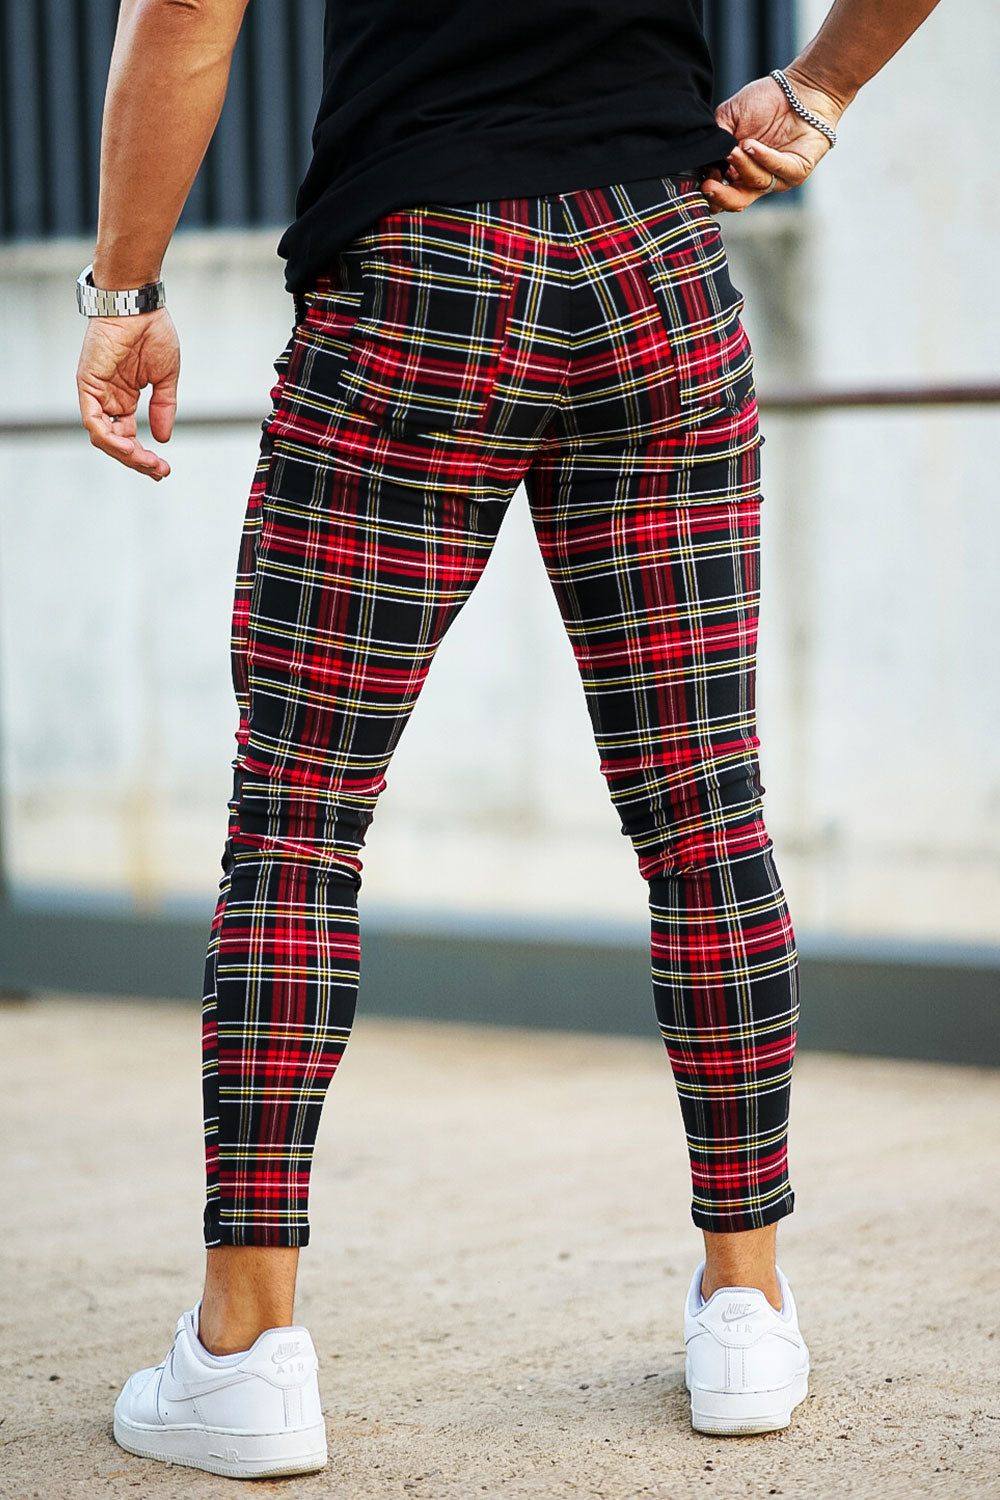 red and black plaid chinos